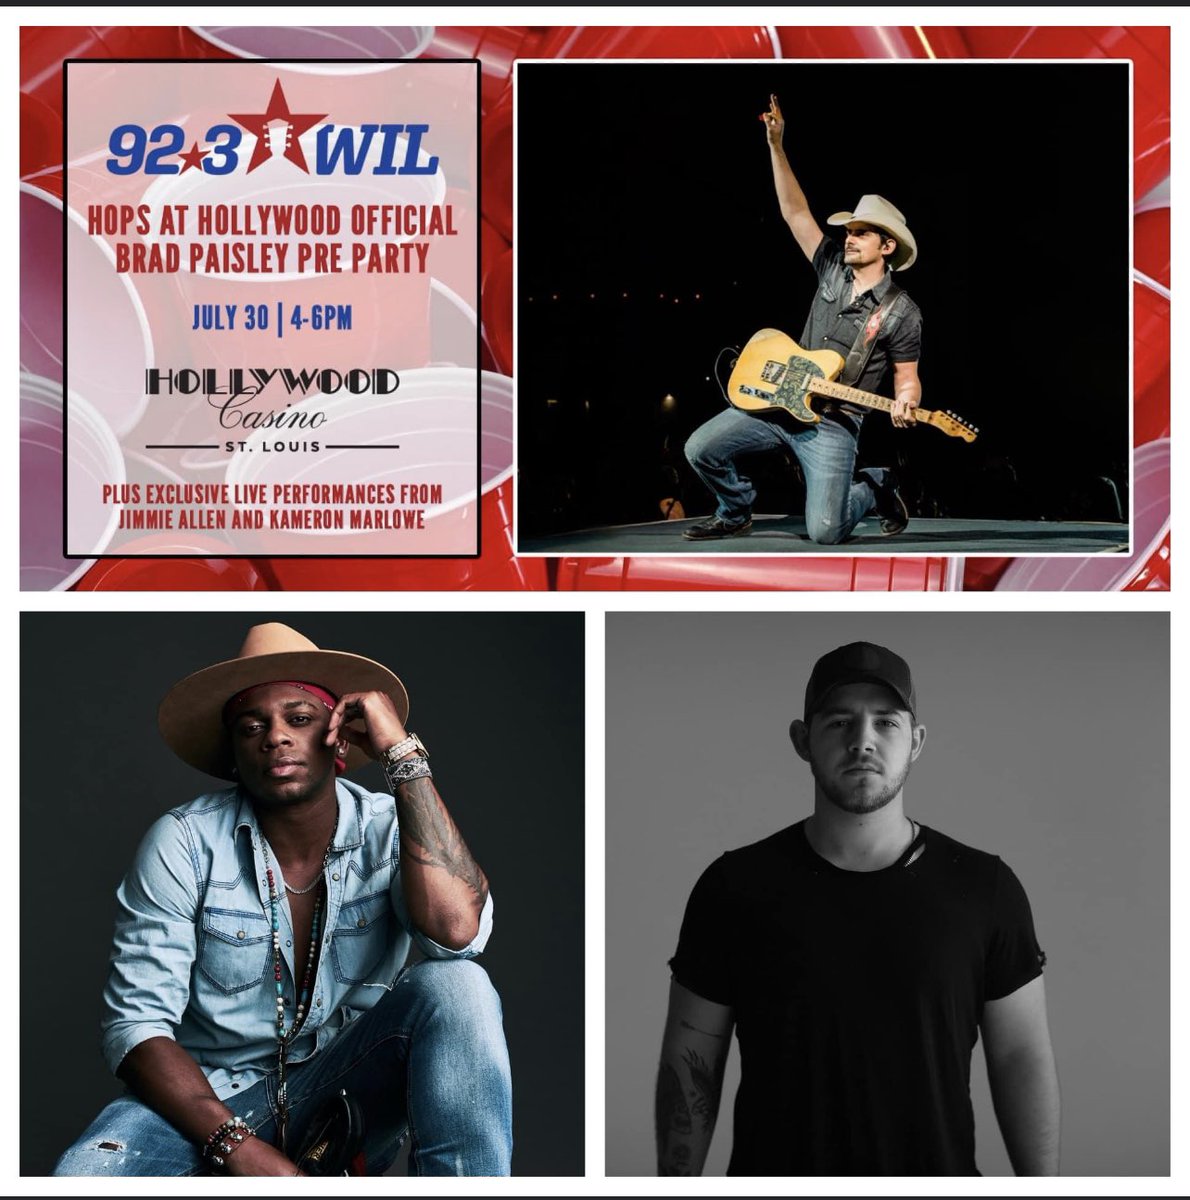 Don’t miss the official @BradPaisley pre party this Friday from 4-6p at @HollywoodSTL! Win shuttle passes to & from the concert, last minute tickets to the show, & catch live performances from @JimmieAllen & Kameron Marlowe! https://t.co/TGUTbiffpQ https://t.co/mDlOa6mN2i